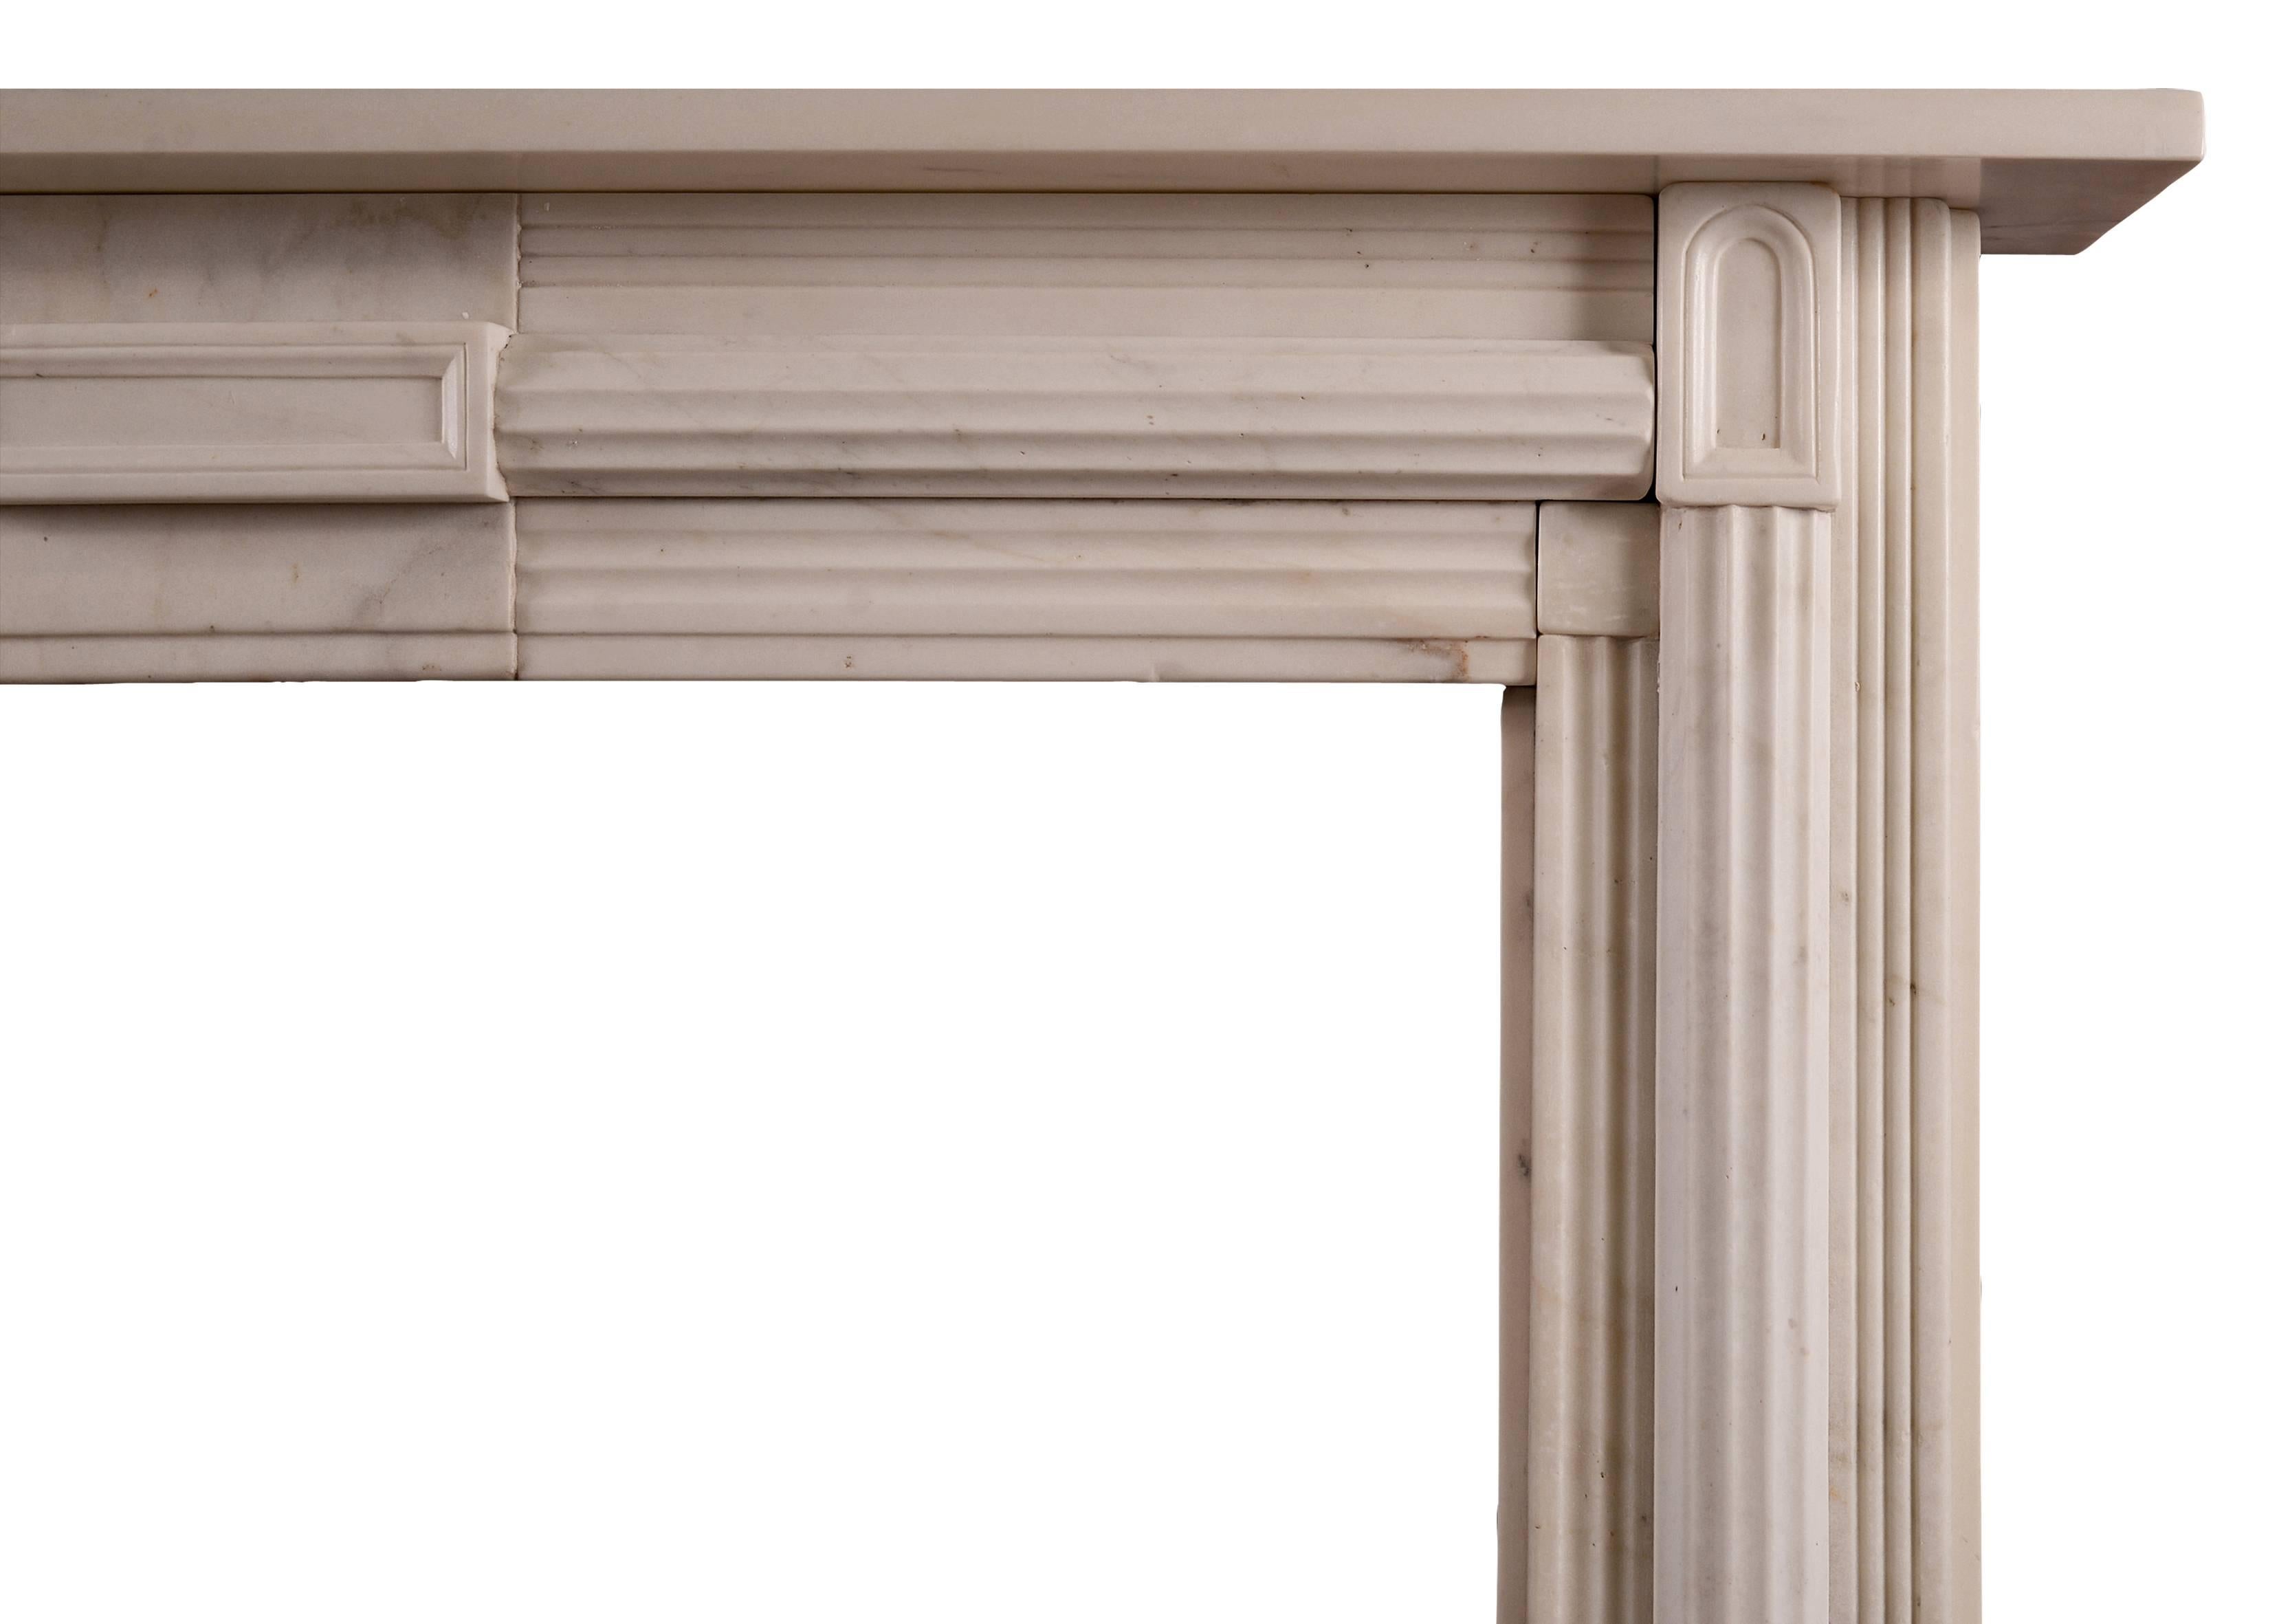 An English statuary white marble fireplace in the Soanian manner. The reeded moulding to jambs and frieze with centre plaque and arched end blockings, 19th century.

Measurements:
Shelf width: 1345 mm / 53 in
Overall height: 1145 mm / 45 1/8